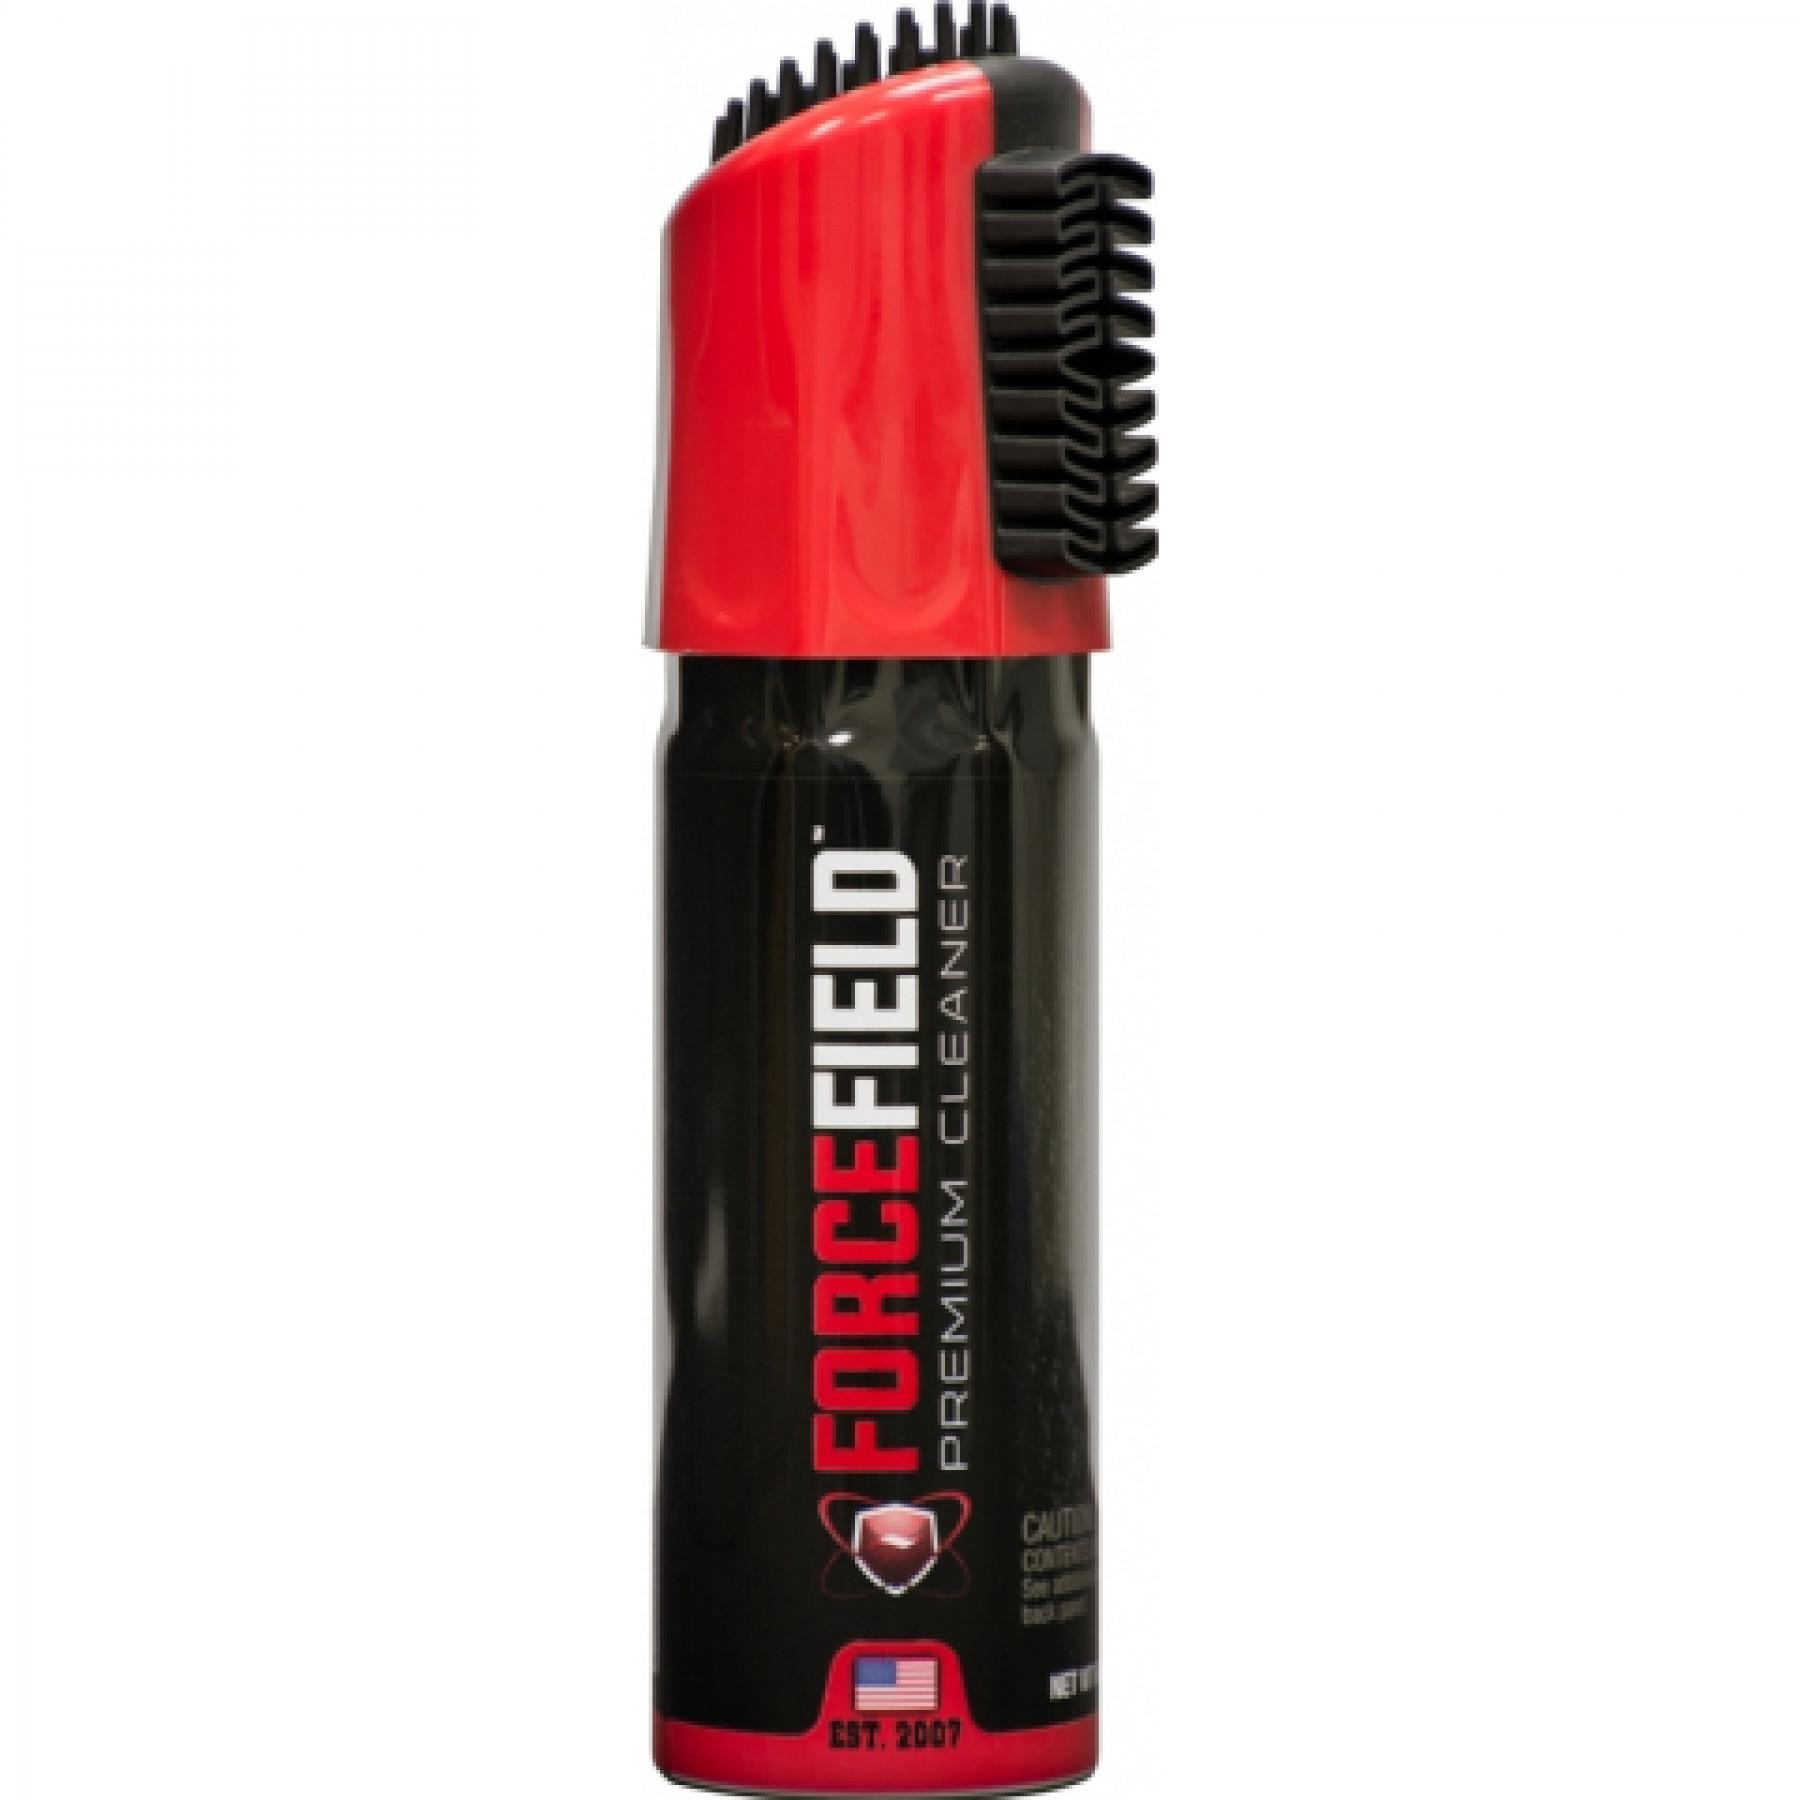 Forcefield shoe cleaner with brushes